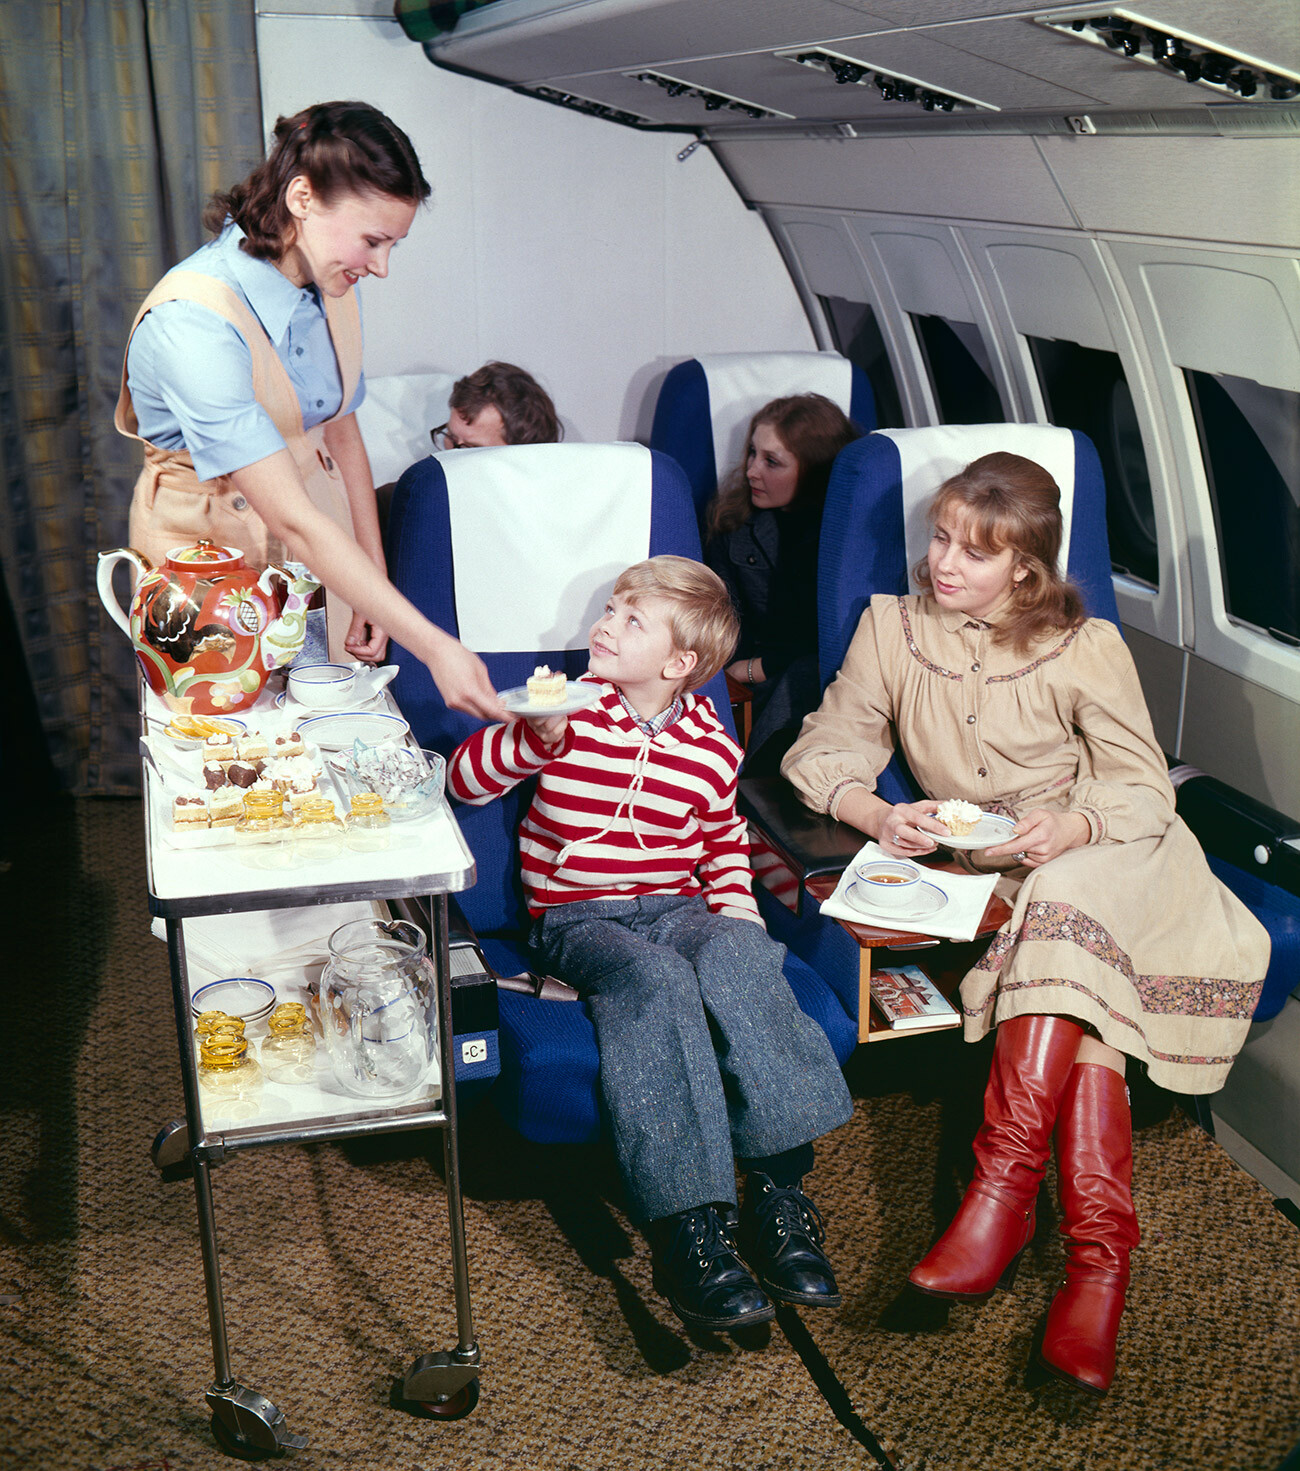 What could you do on planes in the USSR, but you can't now